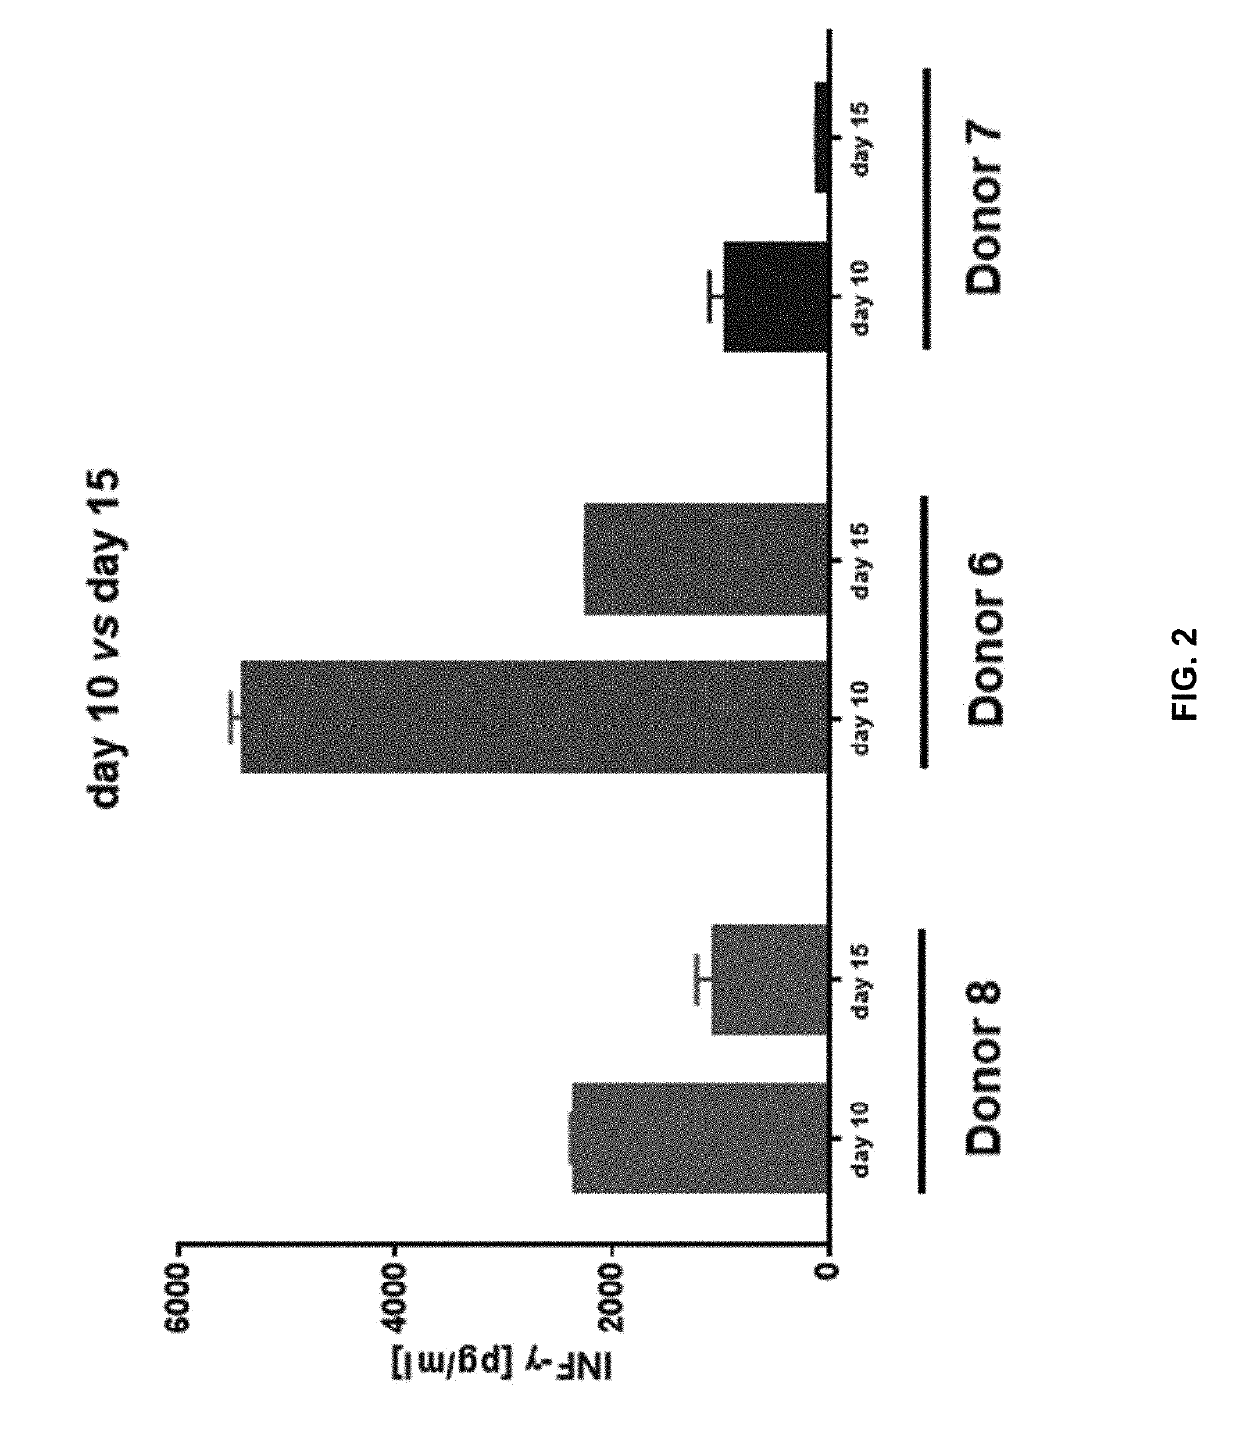 Methods for manufacturing t cells